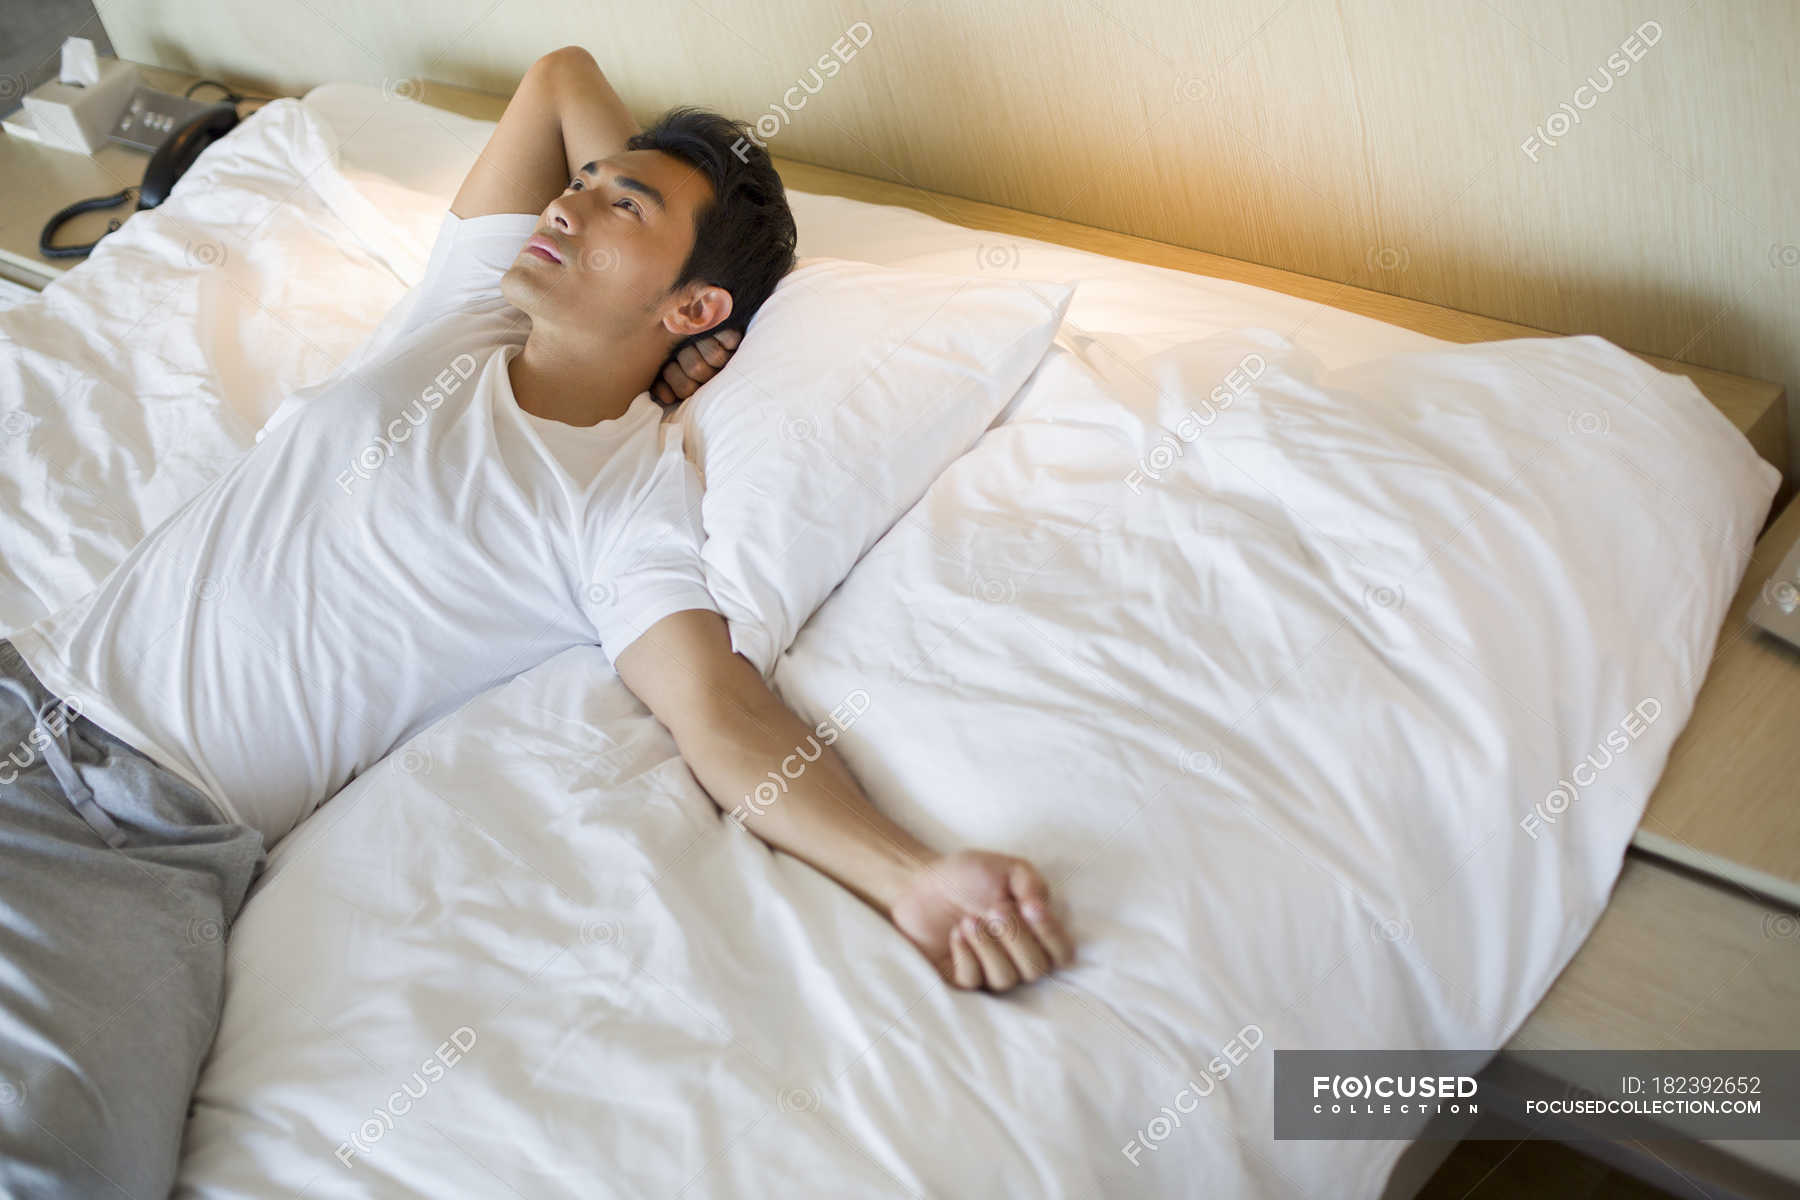 Chinese Man Lying On Bed And Looking Up — Comfortable Lifestyle